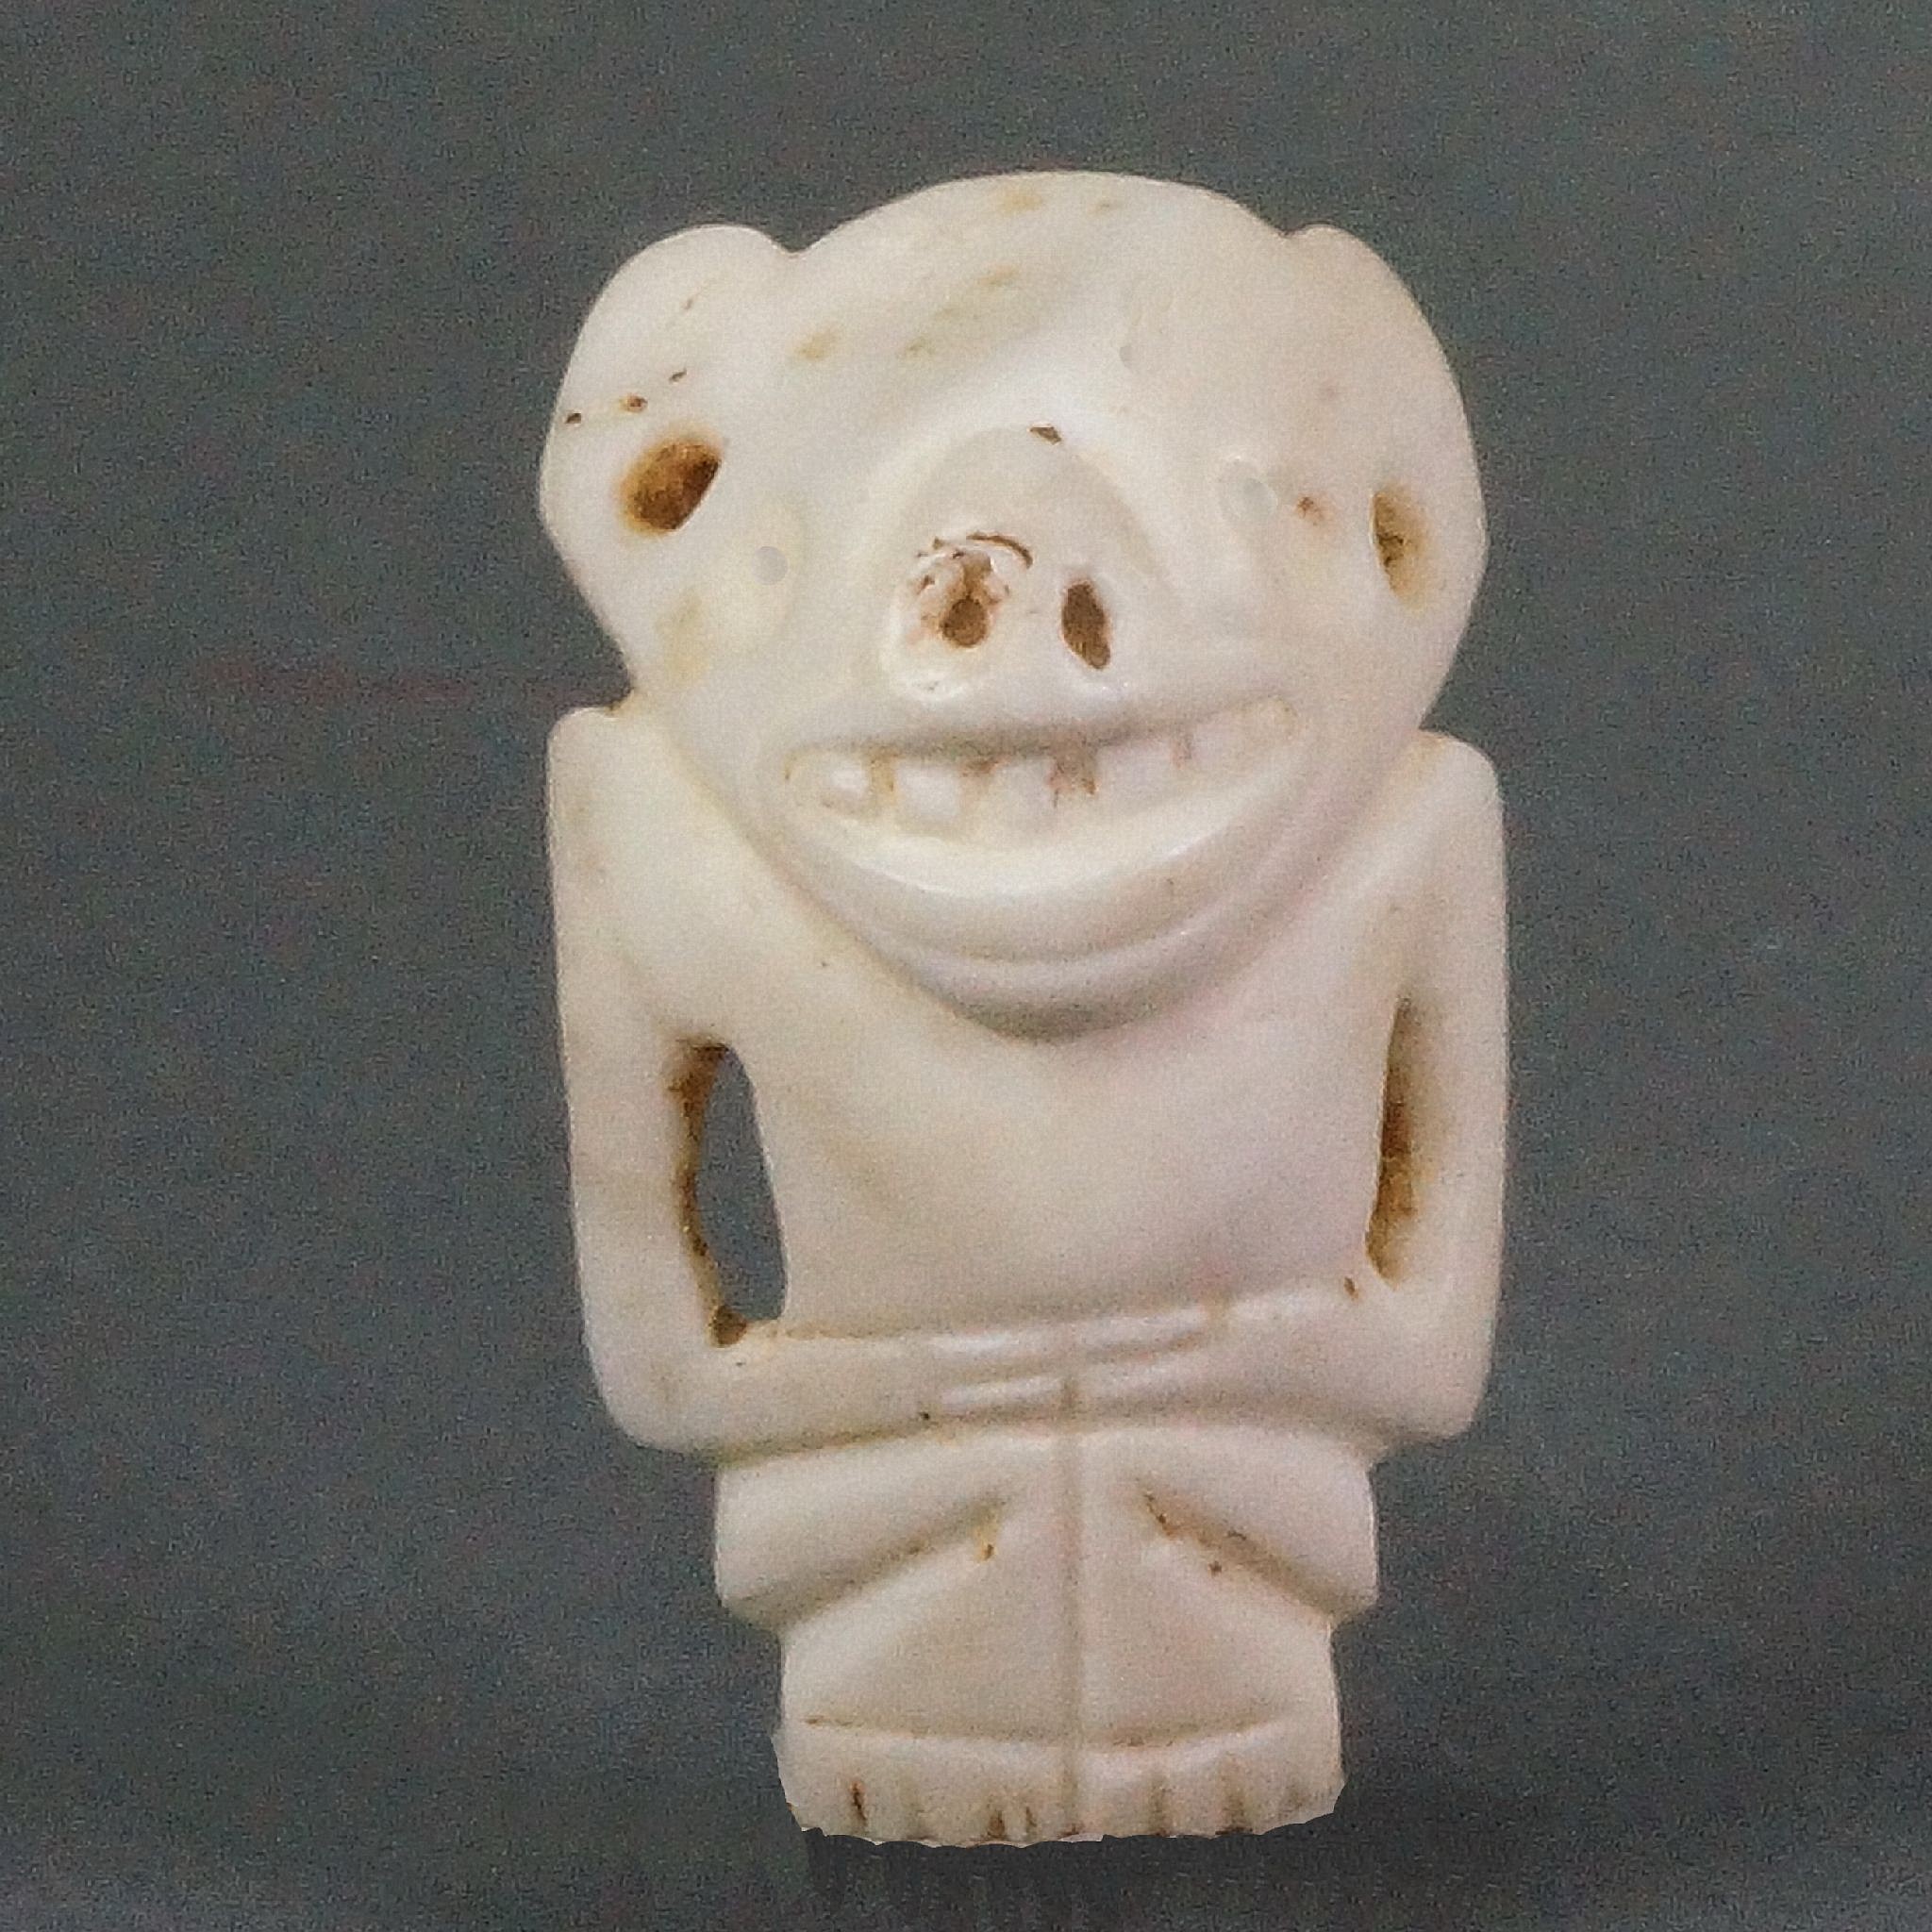 Dominican Republic, Taino Carved Shell Bat Deity Amulet
This bat deity amulet features a stylized human figure with bat-like features, such as large ears and a pug nose.  There are two suspension holes below each ear.  This amulet was likely originally the central bead on a larger beaded necklace.
Media: Shell
Dimensions: Height: 1 1/2"
$2,250
98149